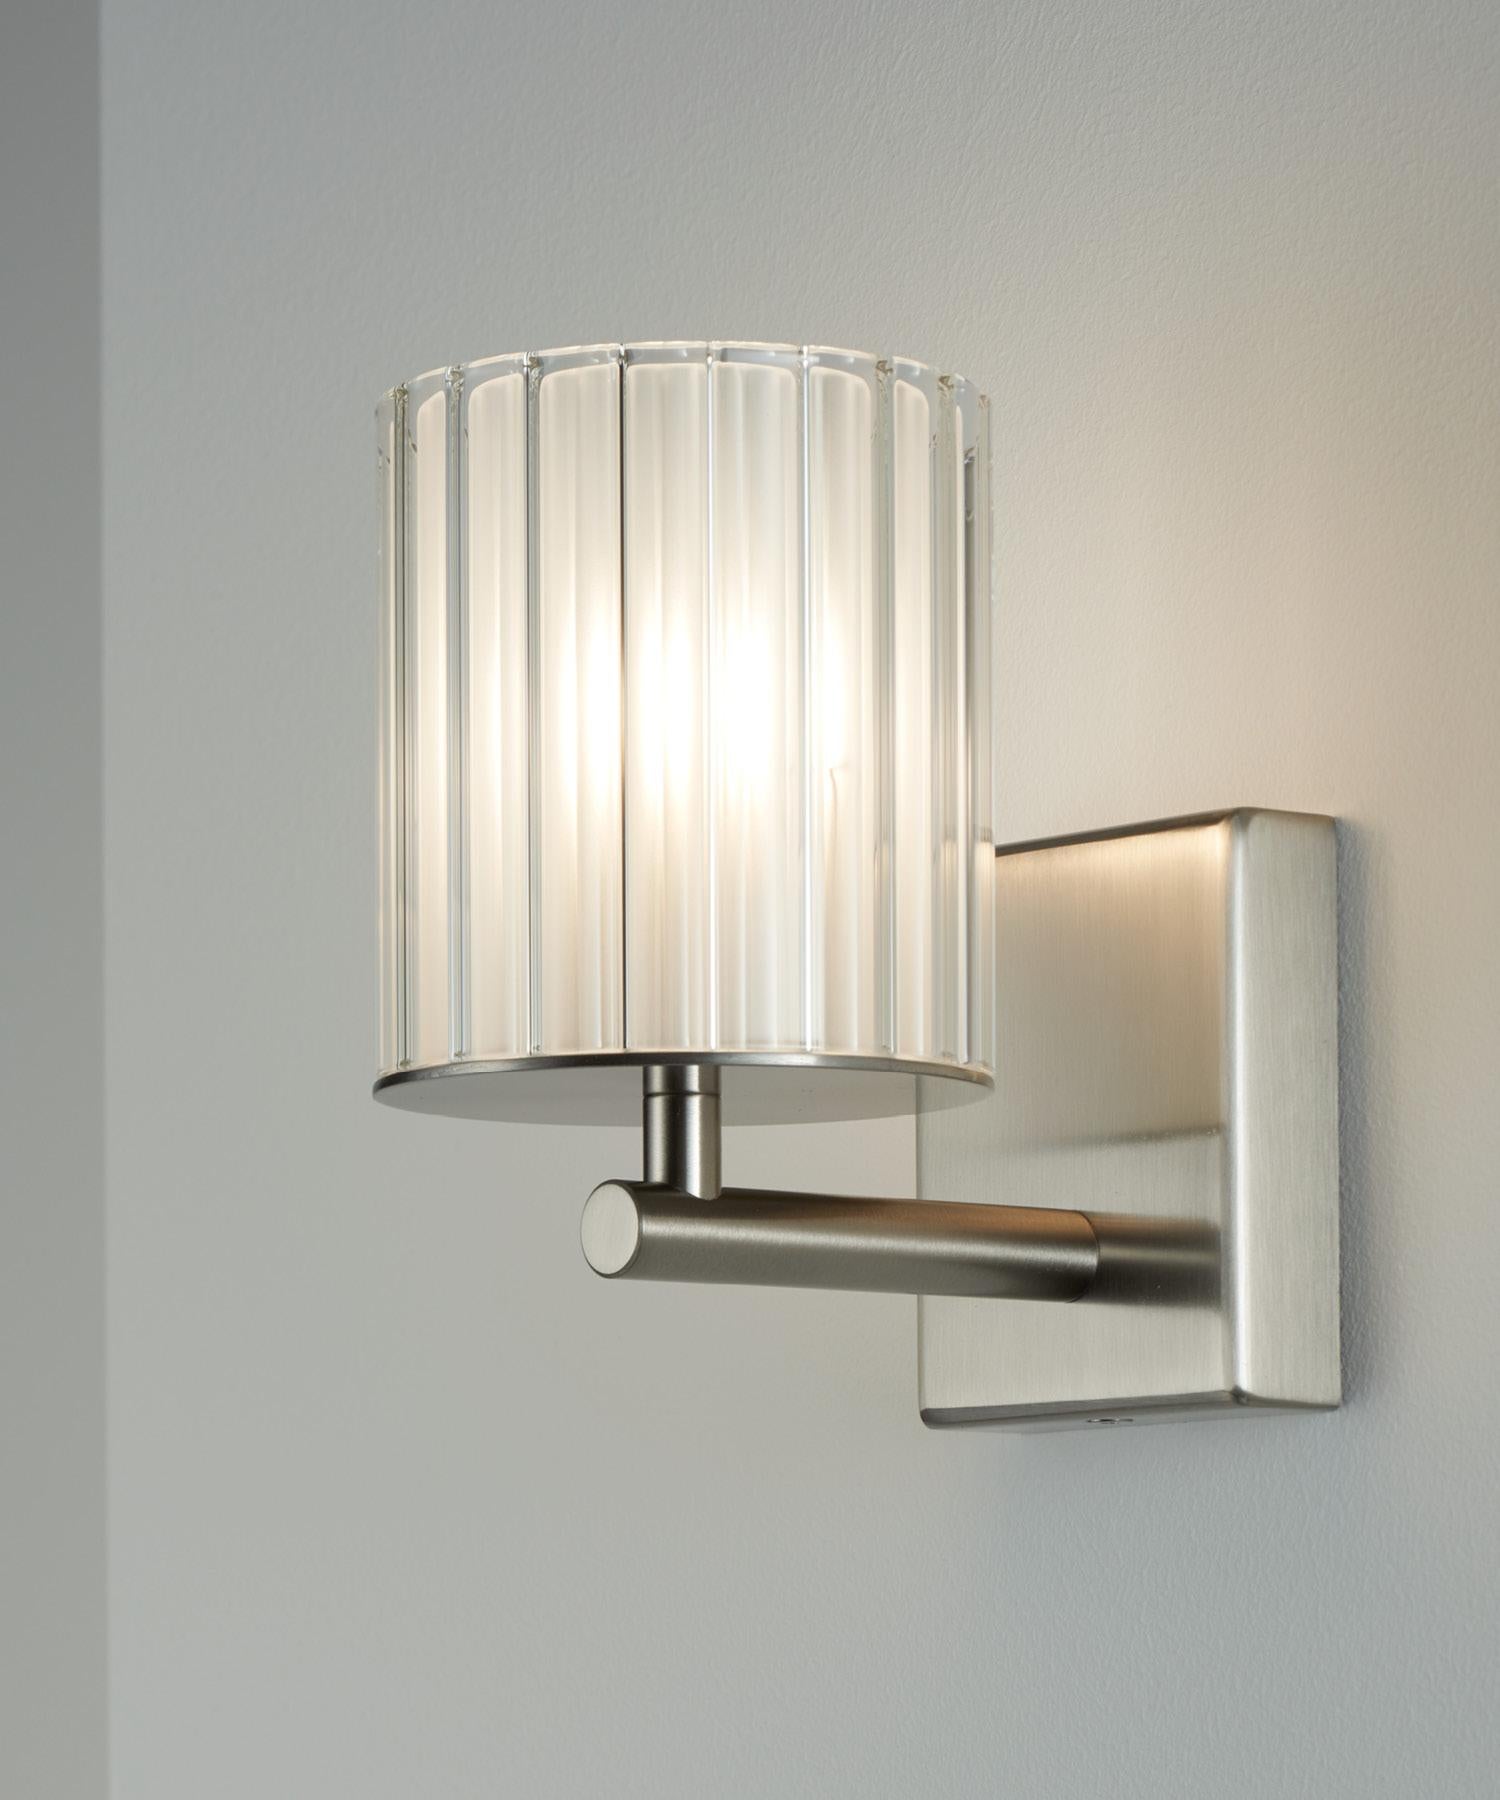 The flute wall light's frosted glass diffuser produces a soft, subtle glow that is ideal for a range of applications. It is the perfect accompaniment to the Flute Pendant or Chandelier, working brilliantly to build continuity throughout your